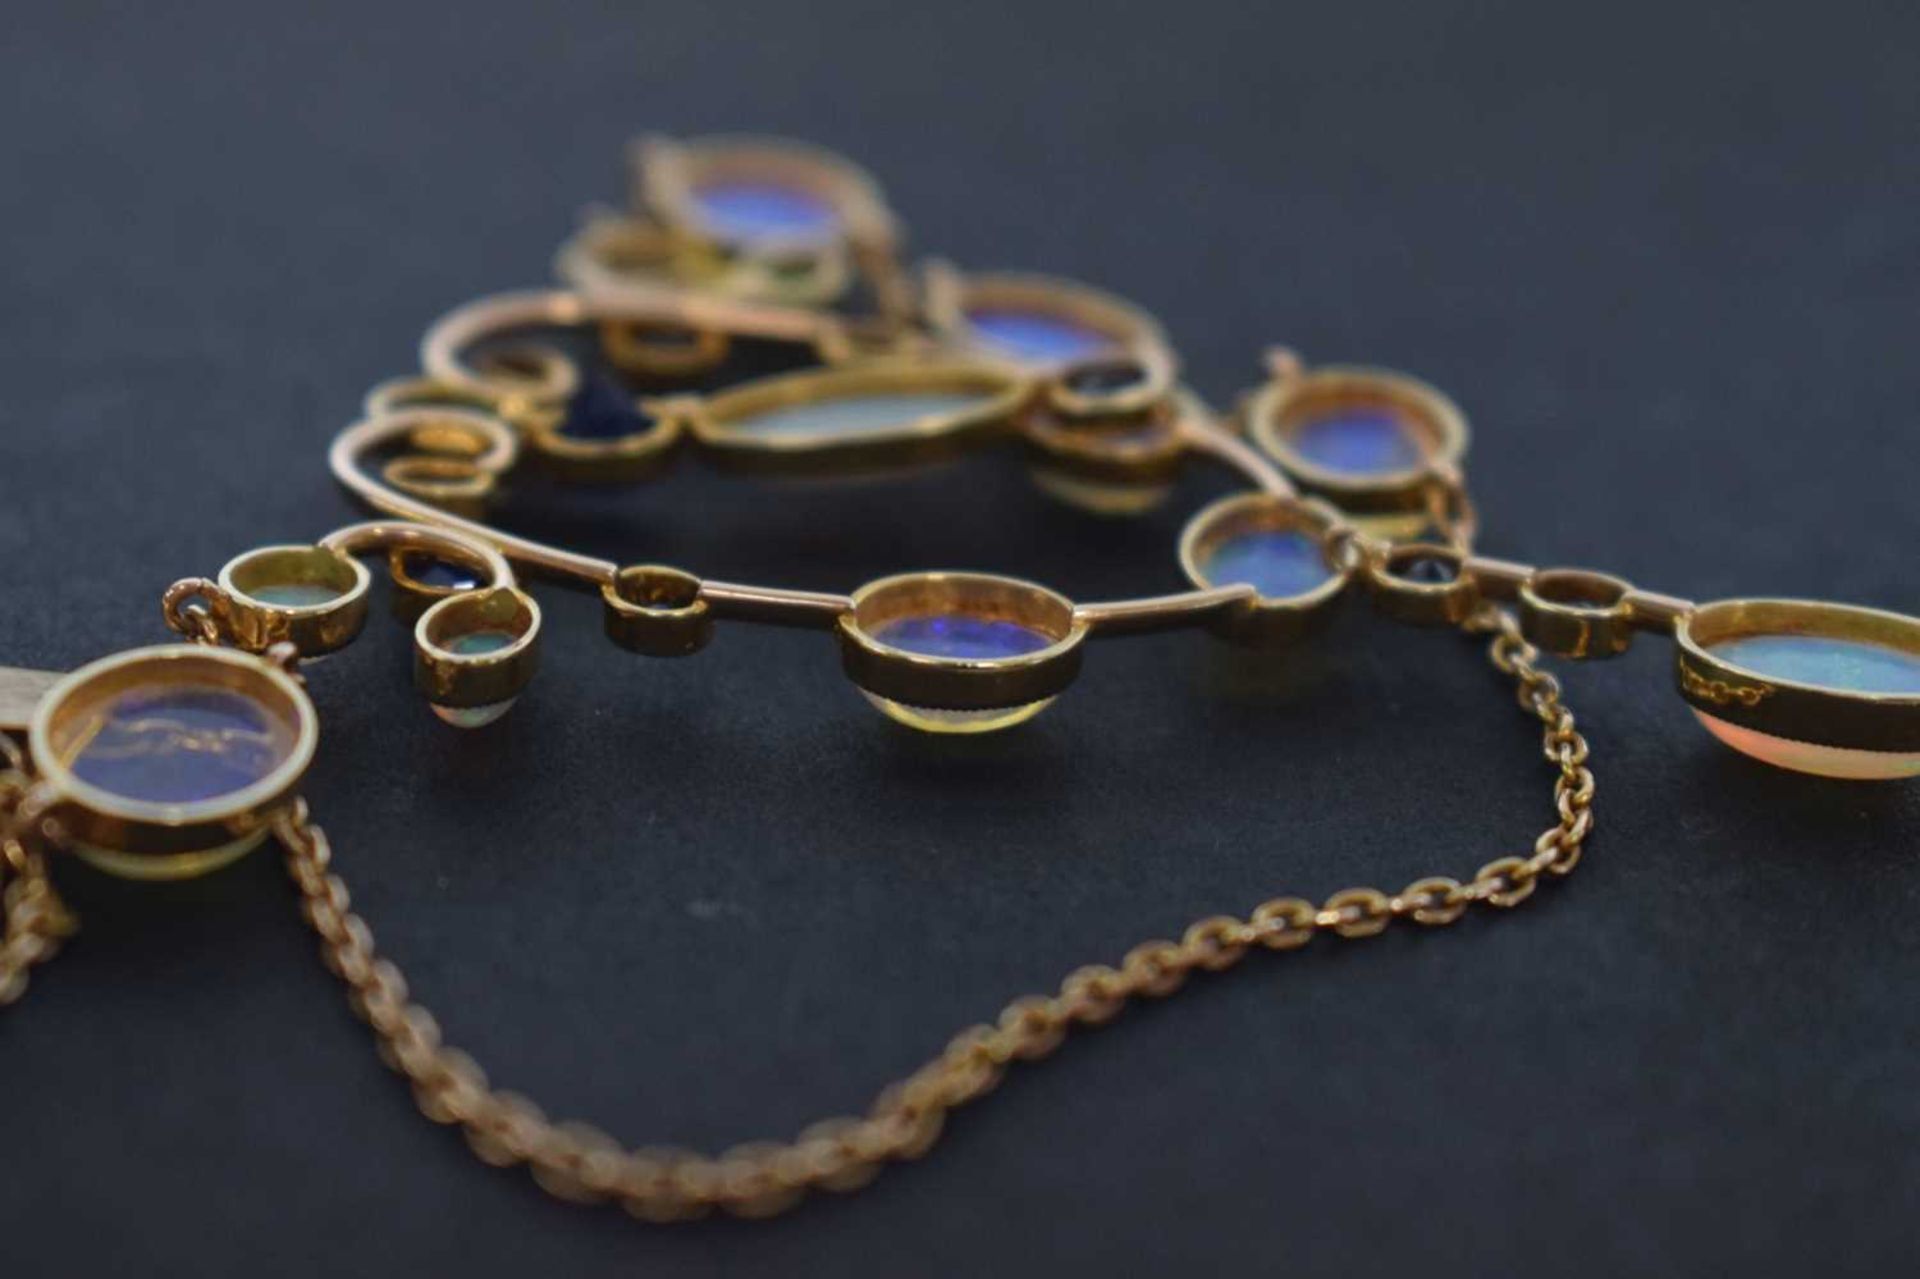 Opal and sapphire pendant necklace in the Arts and Crafts manner - Image 11 of 12